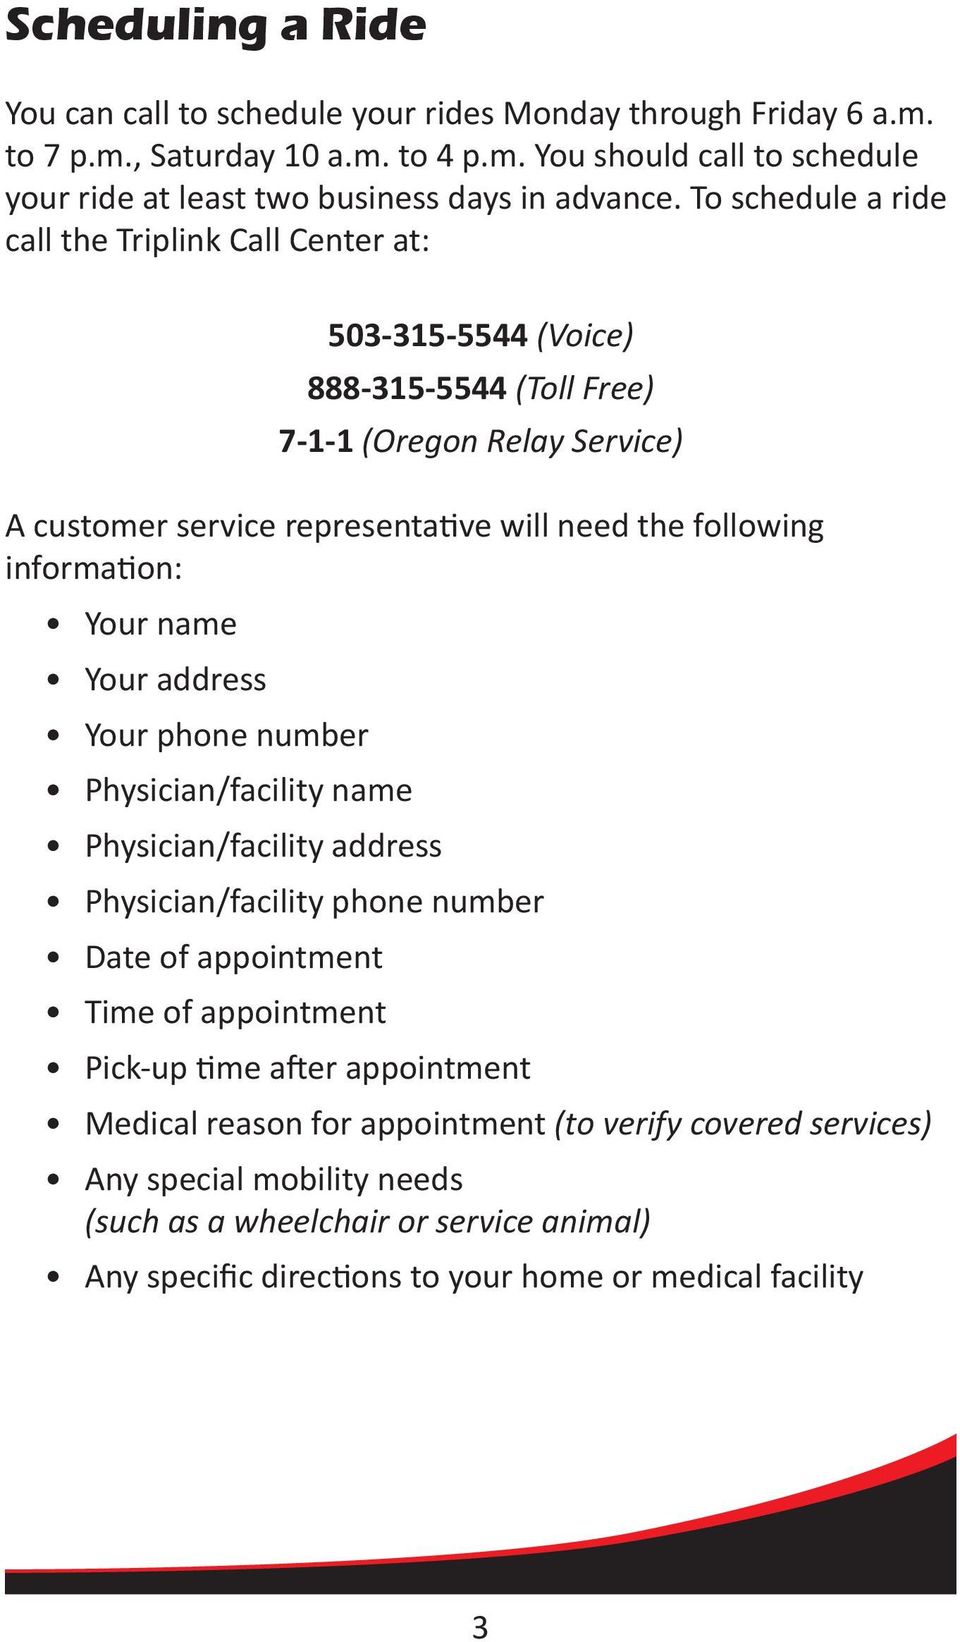 information: Your name Your address Your phone number Physician/facility name Physician/facility address Physician/facility phone number Date of appointment Time of appointment Pick-up time